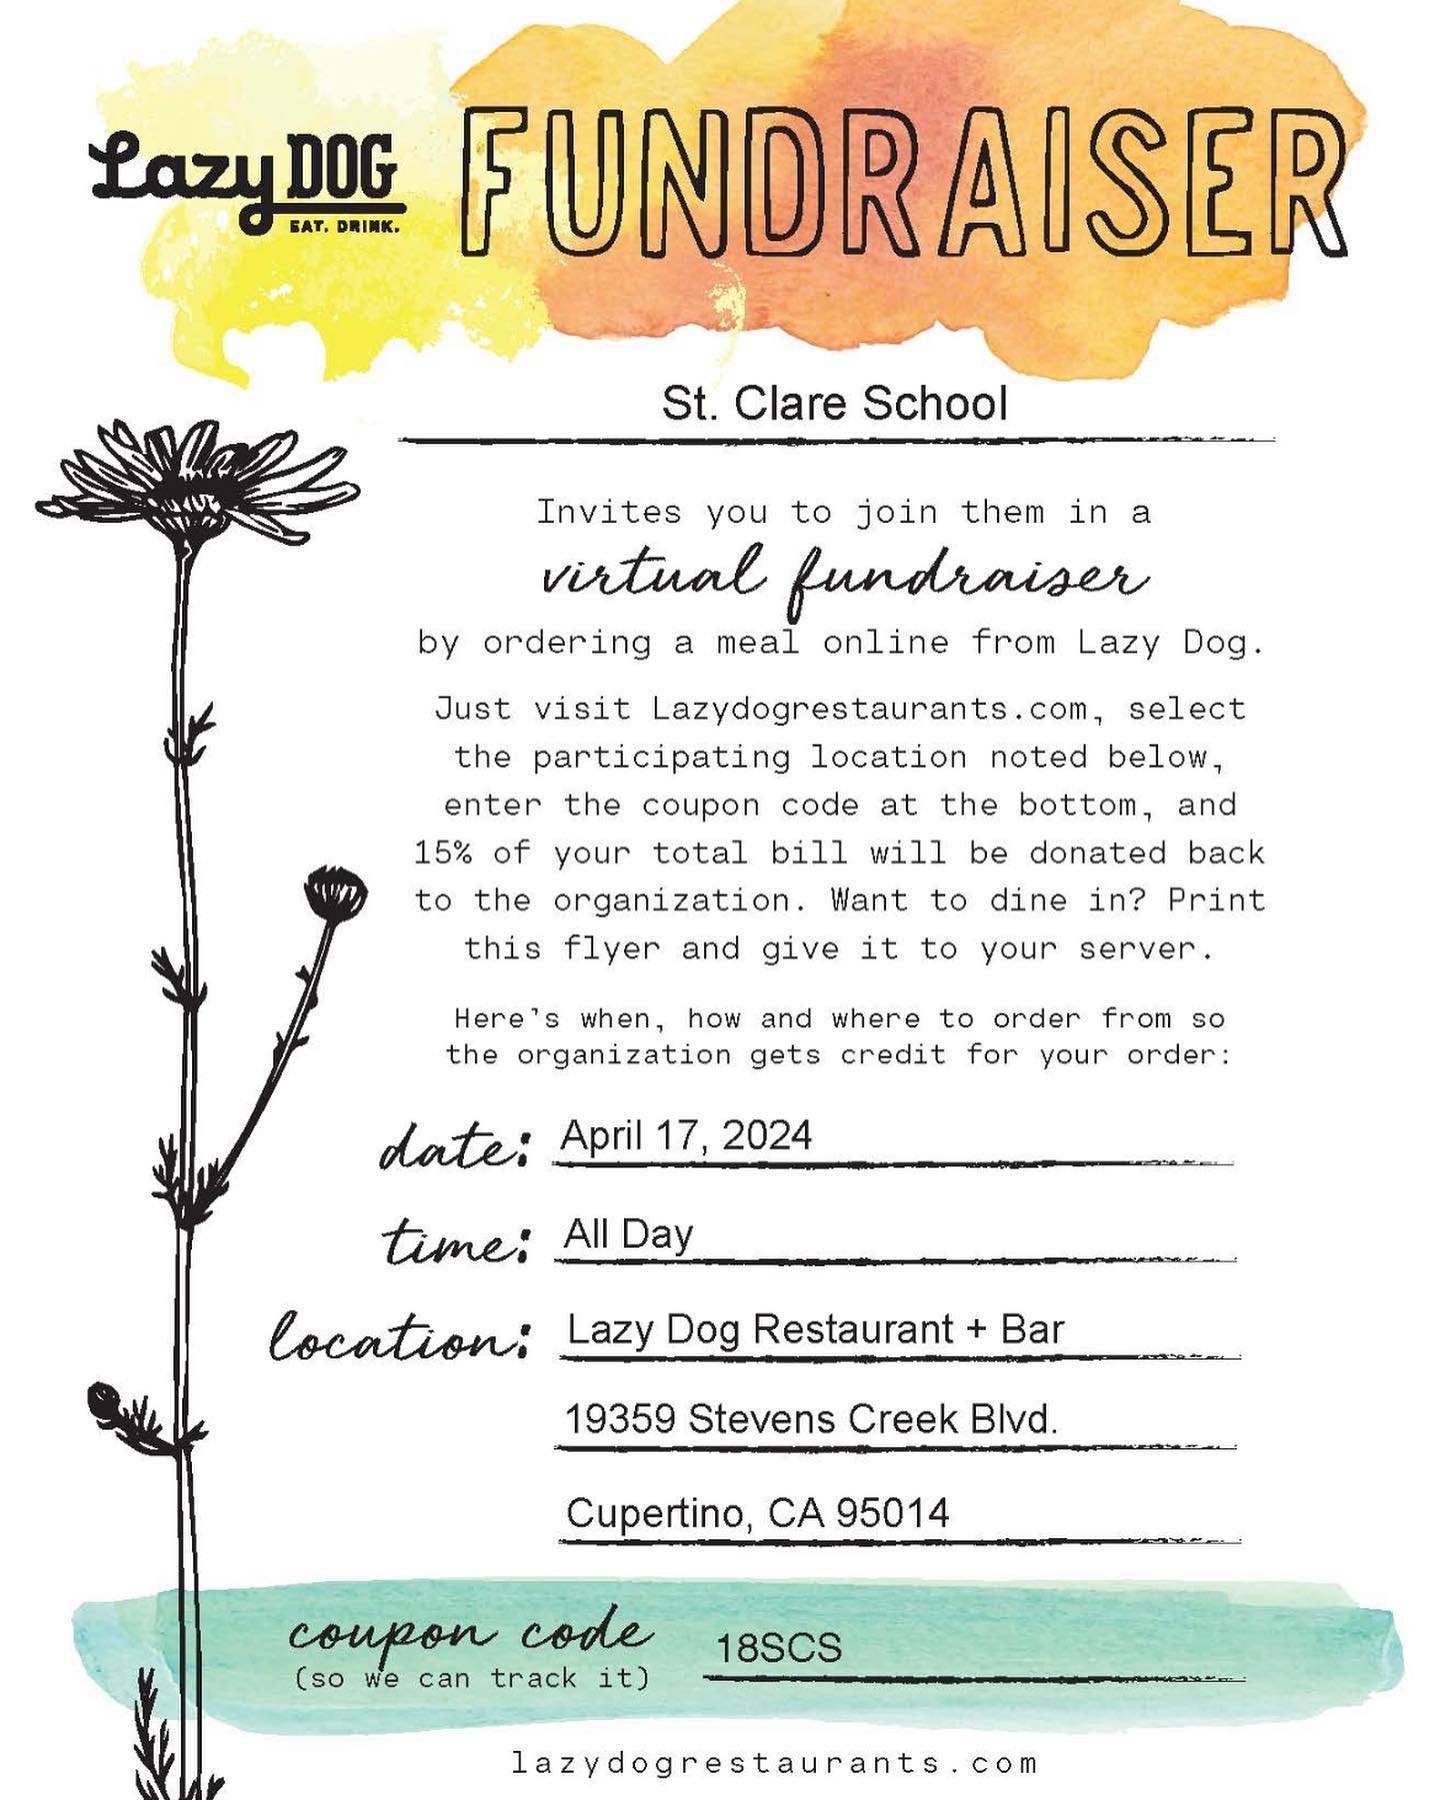 Take the Night Off from Cooking!

Join Us For Our Dine with Lazy Dog Fundraiser on Wednesday, April 17th! 

You can order out using lazydogrestaurants.com and applying the Discount Code: 18SCS

You can also dine in and print this flyer yo give to you